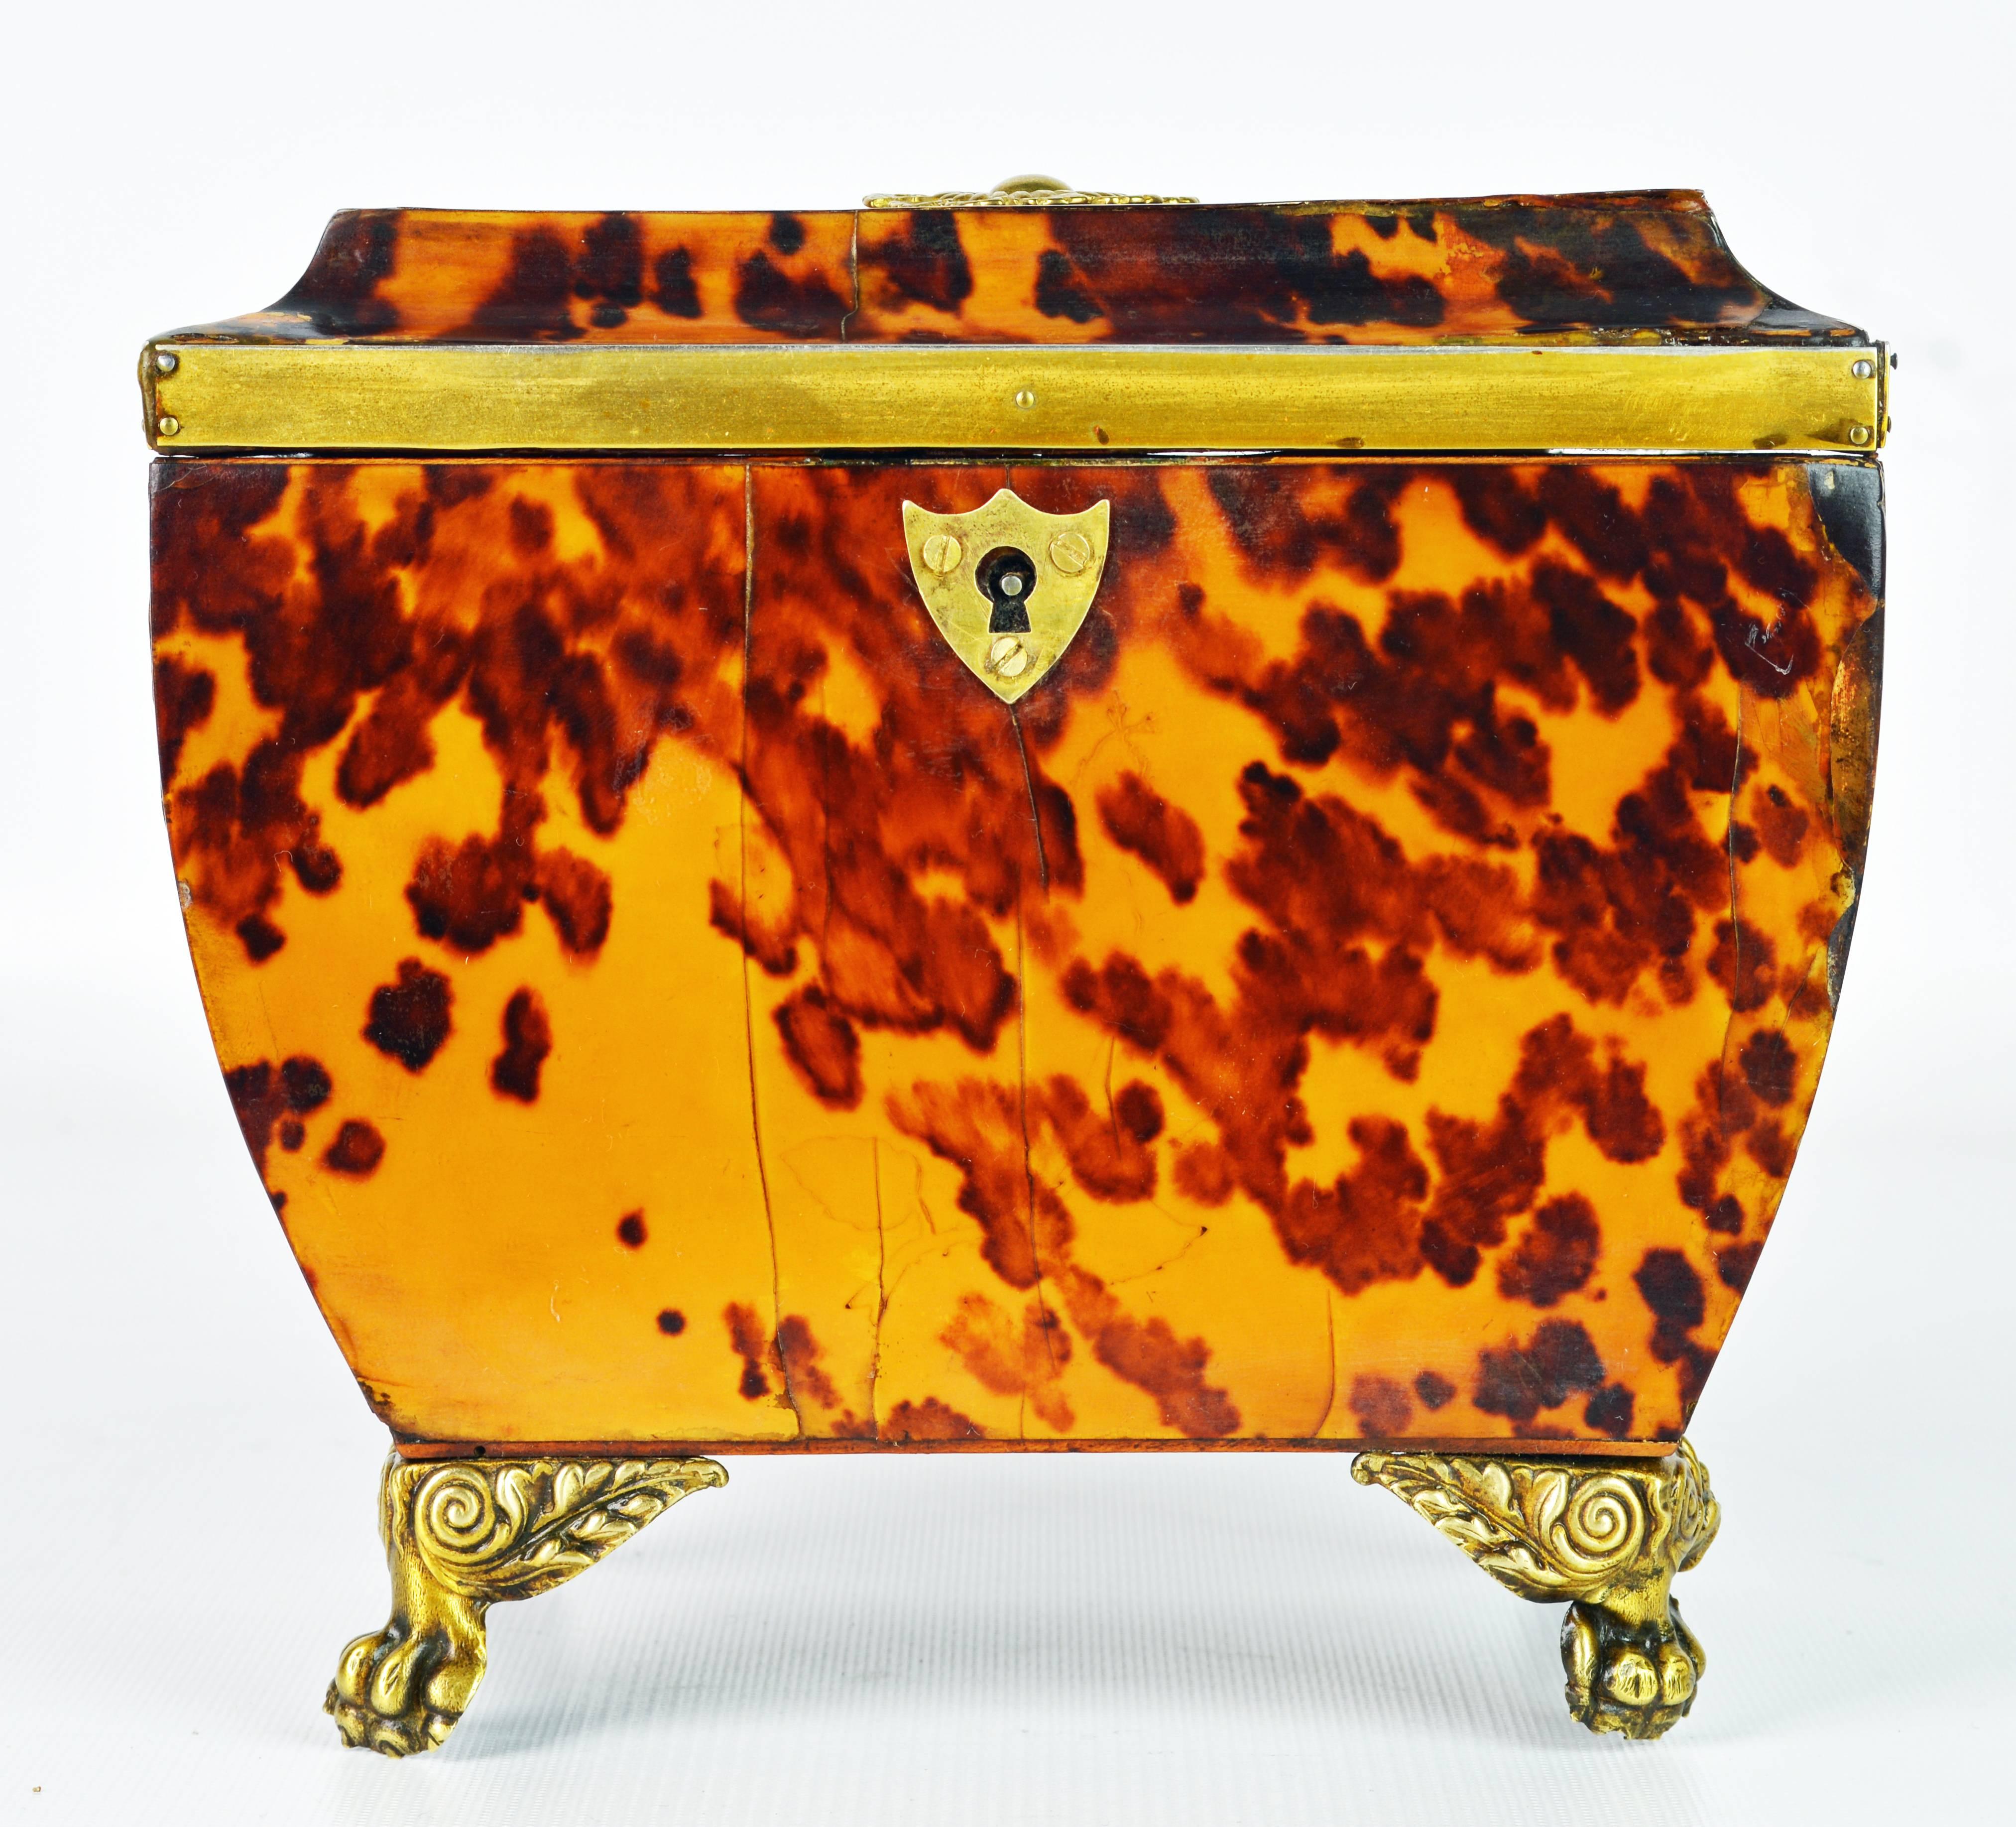 For connoisseurs this tortoise shell tea caddy is a gem. Shaped in the classic regency form and standing on four winged lion paw bronze feet the brass edged and bronze rosette adorned lid opens up to an interior with two lidded compartments